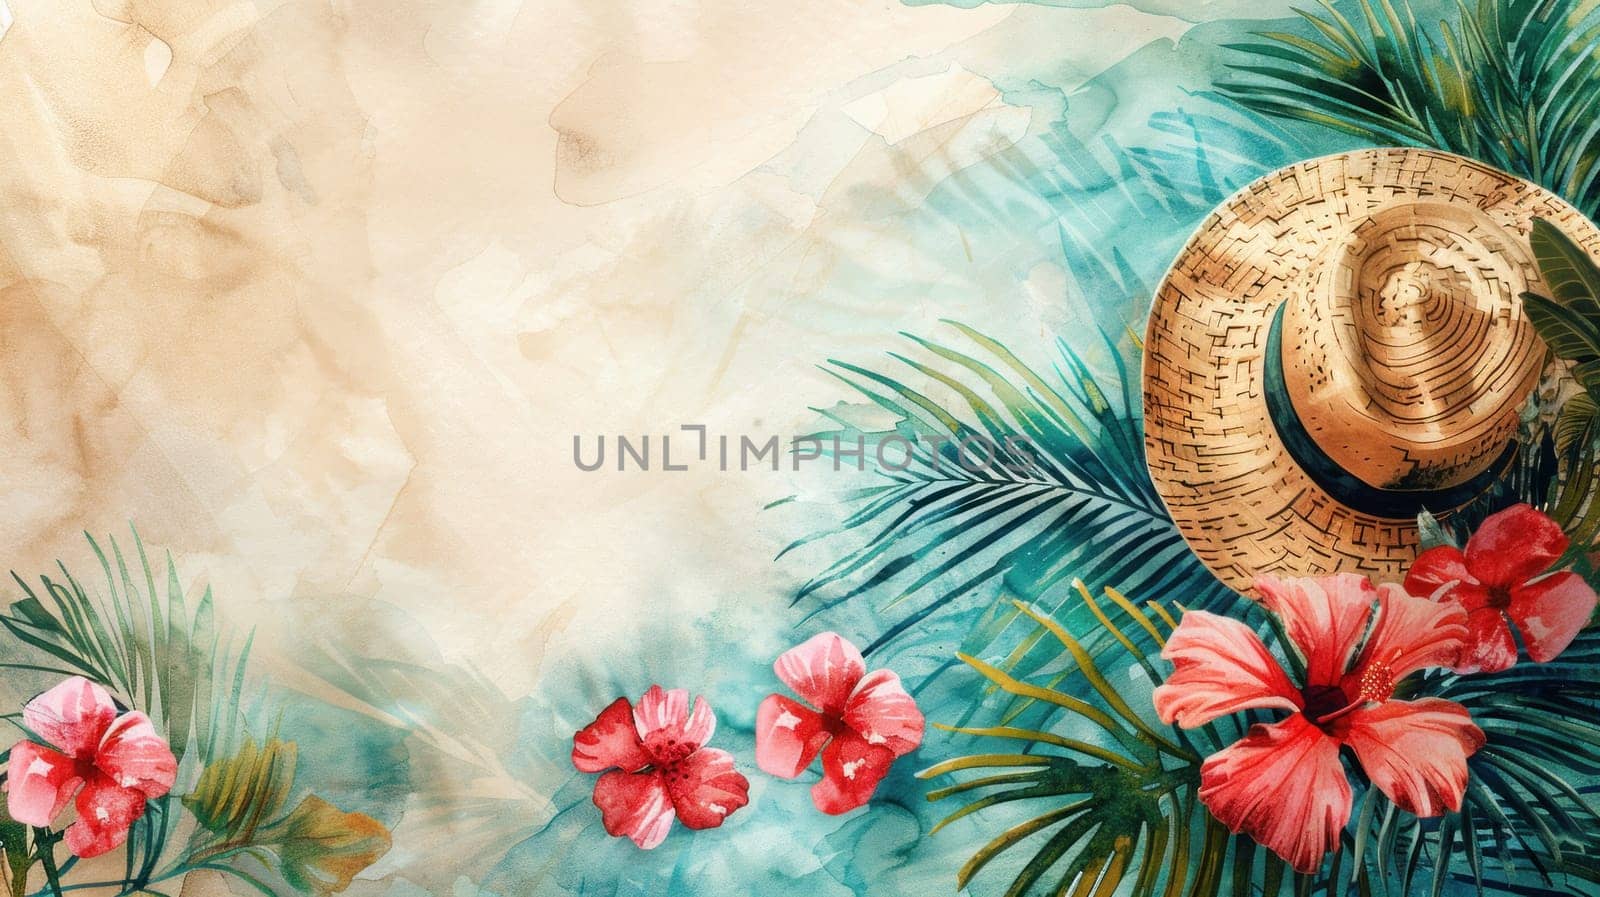 A painting of a tropical scene with pink flowers and green leaves by golfmerrymaker